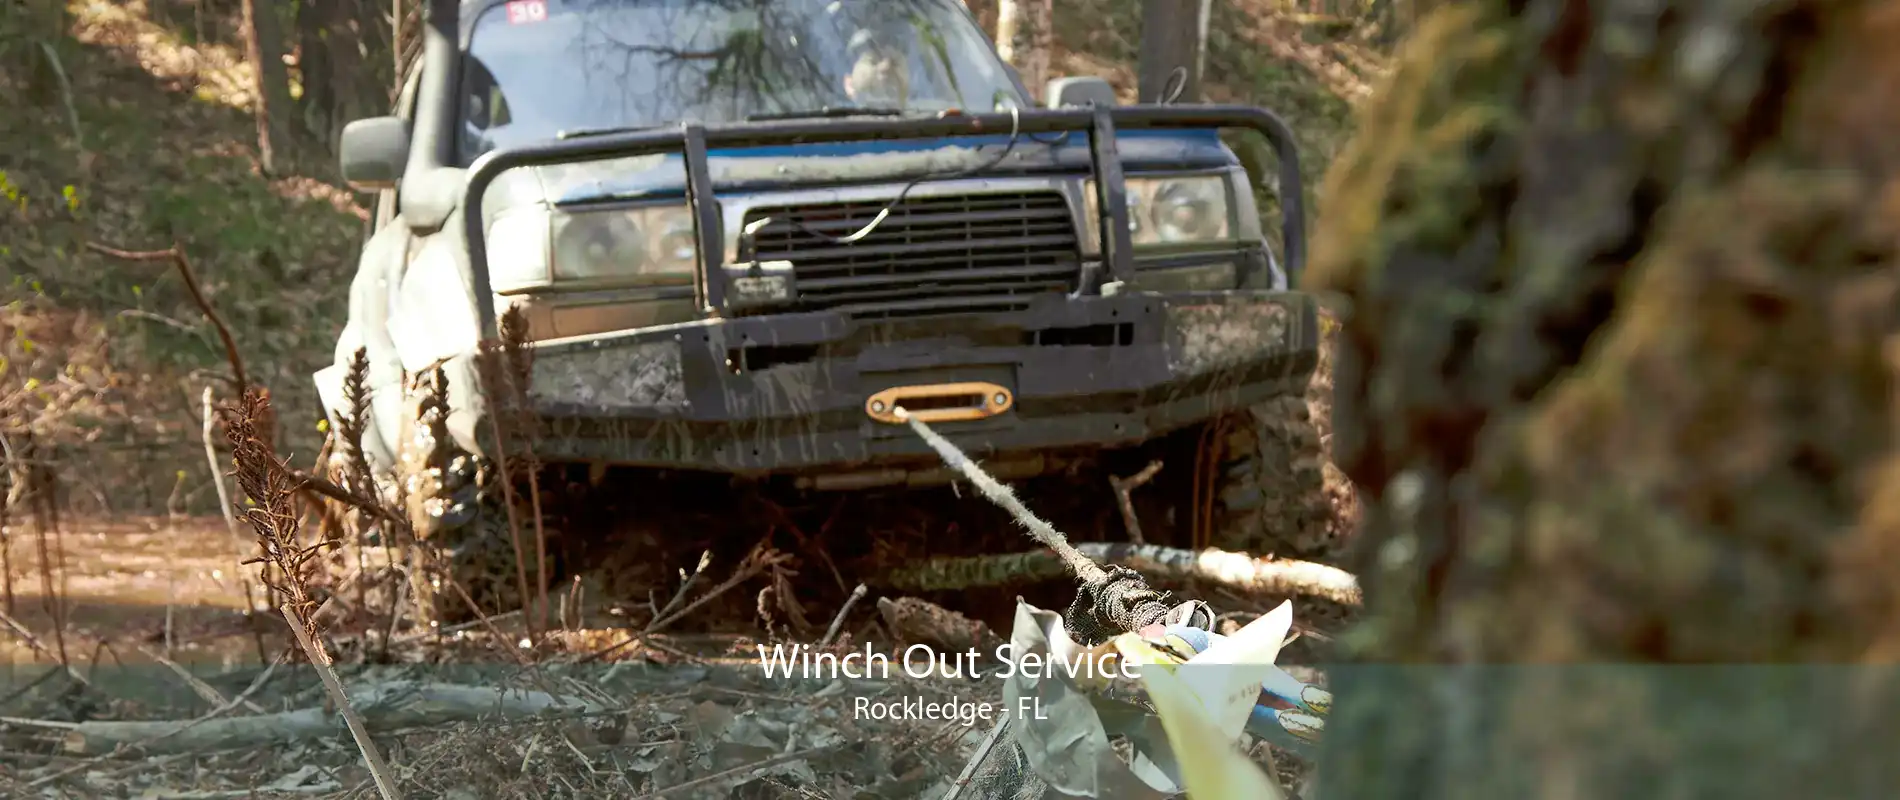 Winch Out Service Rockledge - FL